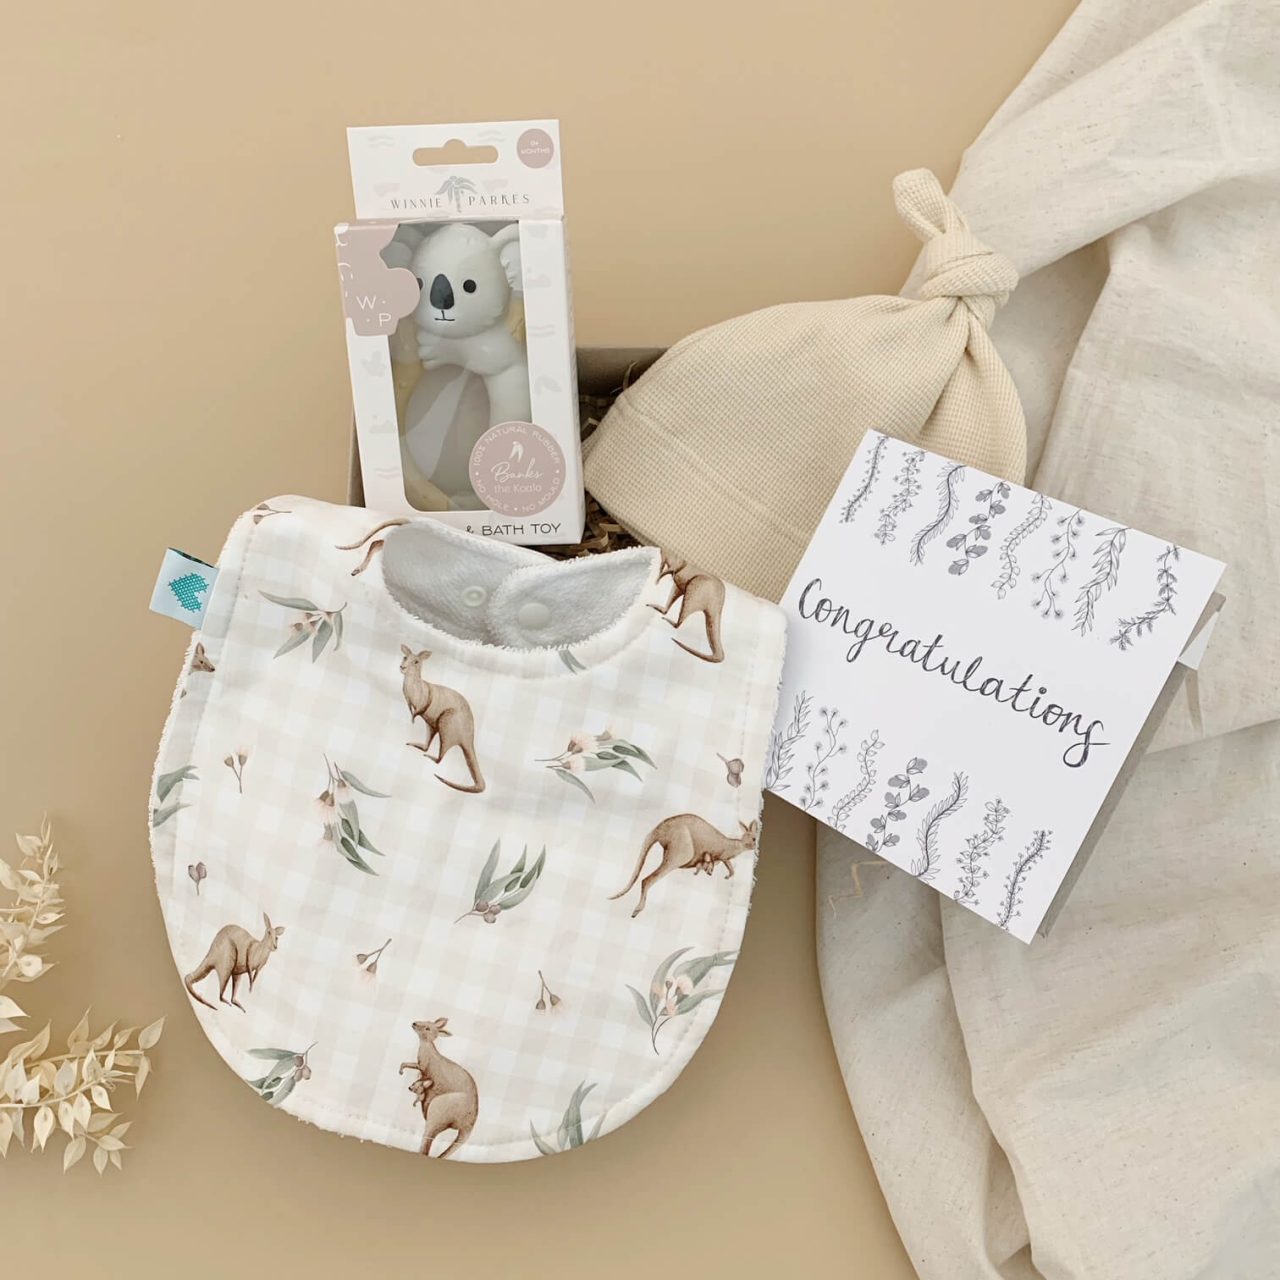 Perth Baby Gifts and Baby Hamper | In-store or Delivery - My Little ...